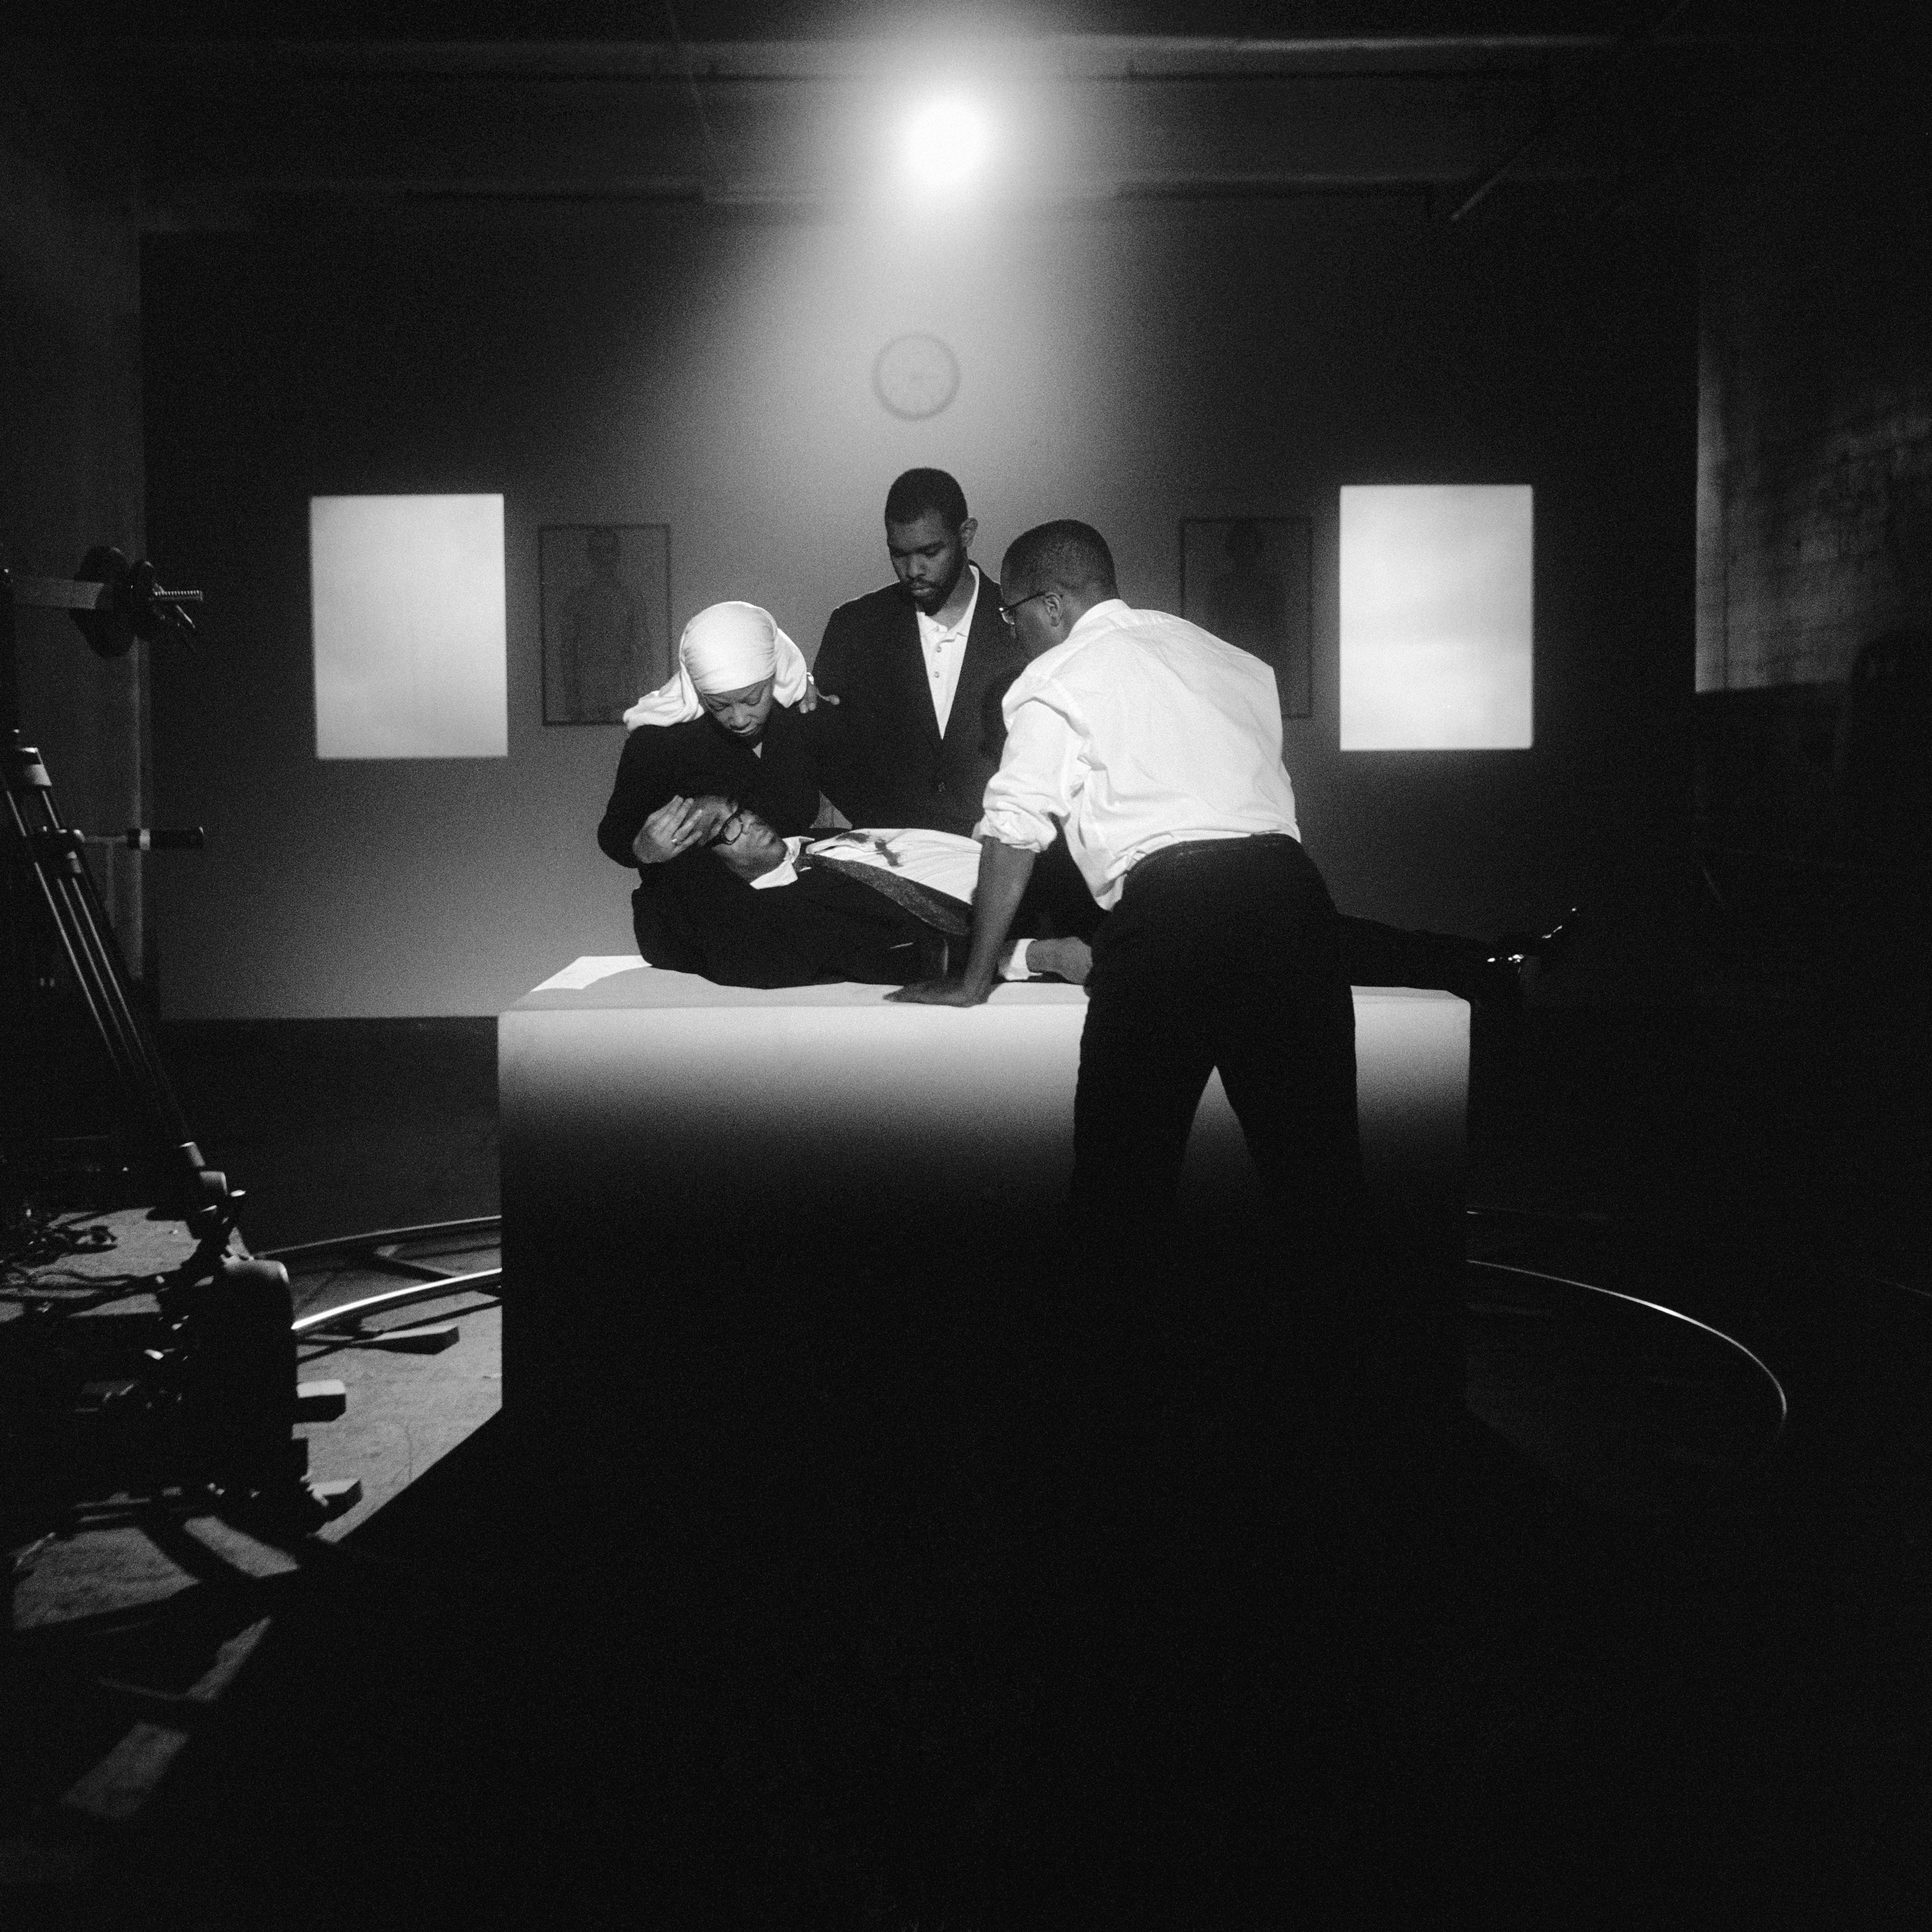 Galerie Barbara Thumm \ Carrie Mae Weems_The Assassination of Medgar, Malcom and Martin_2008_CMW-08-7949 \ The Assassination of Medgar, Malcom and Martin (2008)